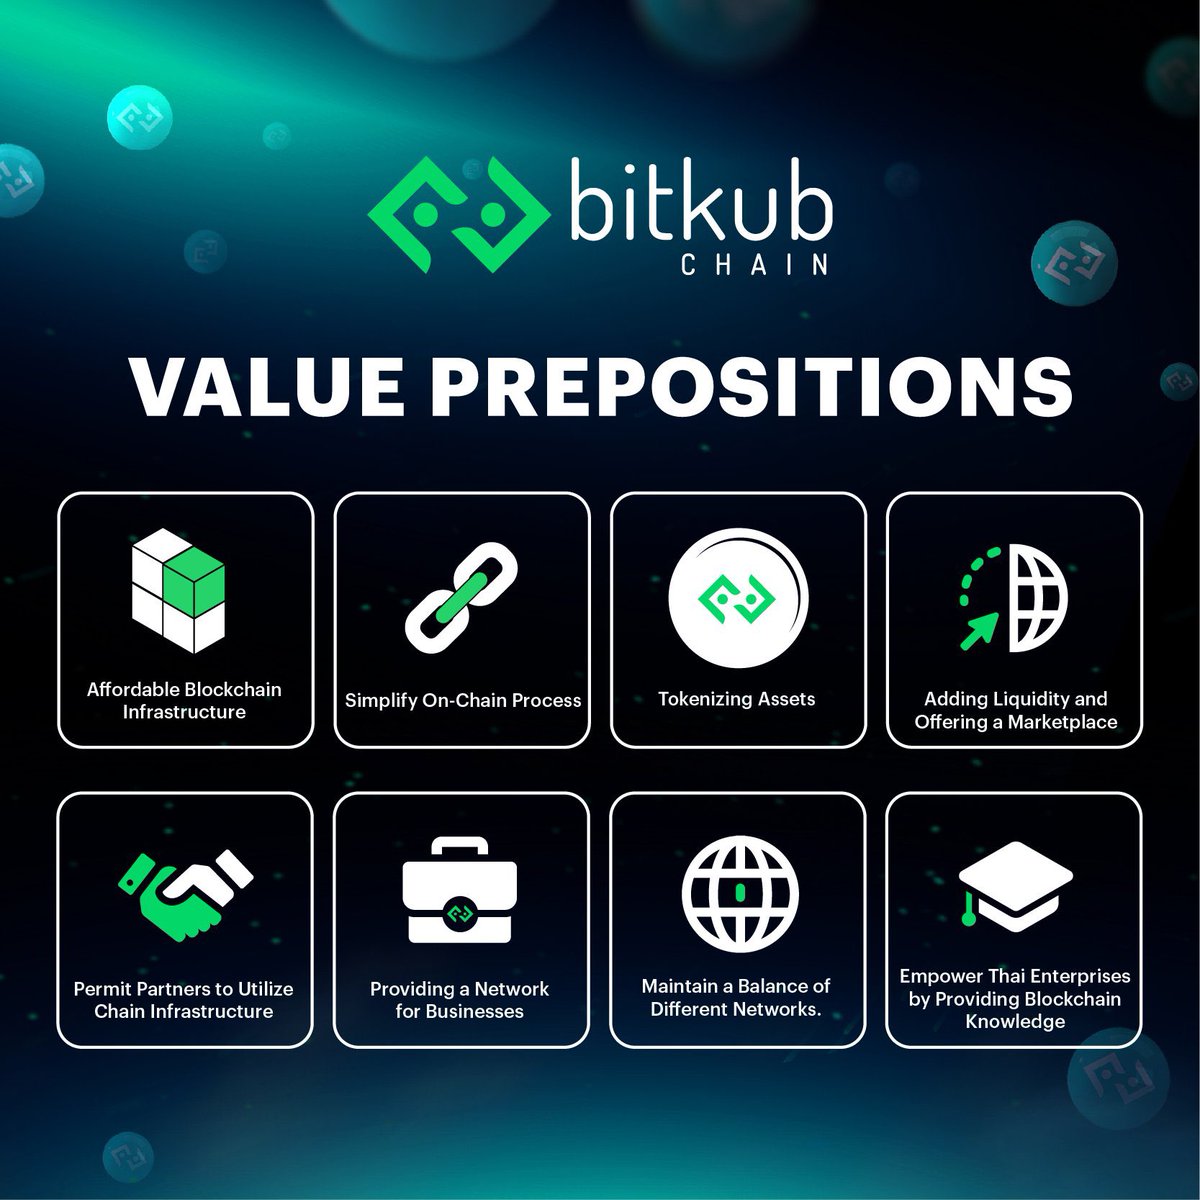 💡Get to know more on value prepositions of Bitkub Chain
.
📖 Discover Bitkub Chain ecosystem and earn points today at
app.galxe.com/quest/U2g27JZA…
.
#BitkubChain #Blockchain #Crypto #Airdrops